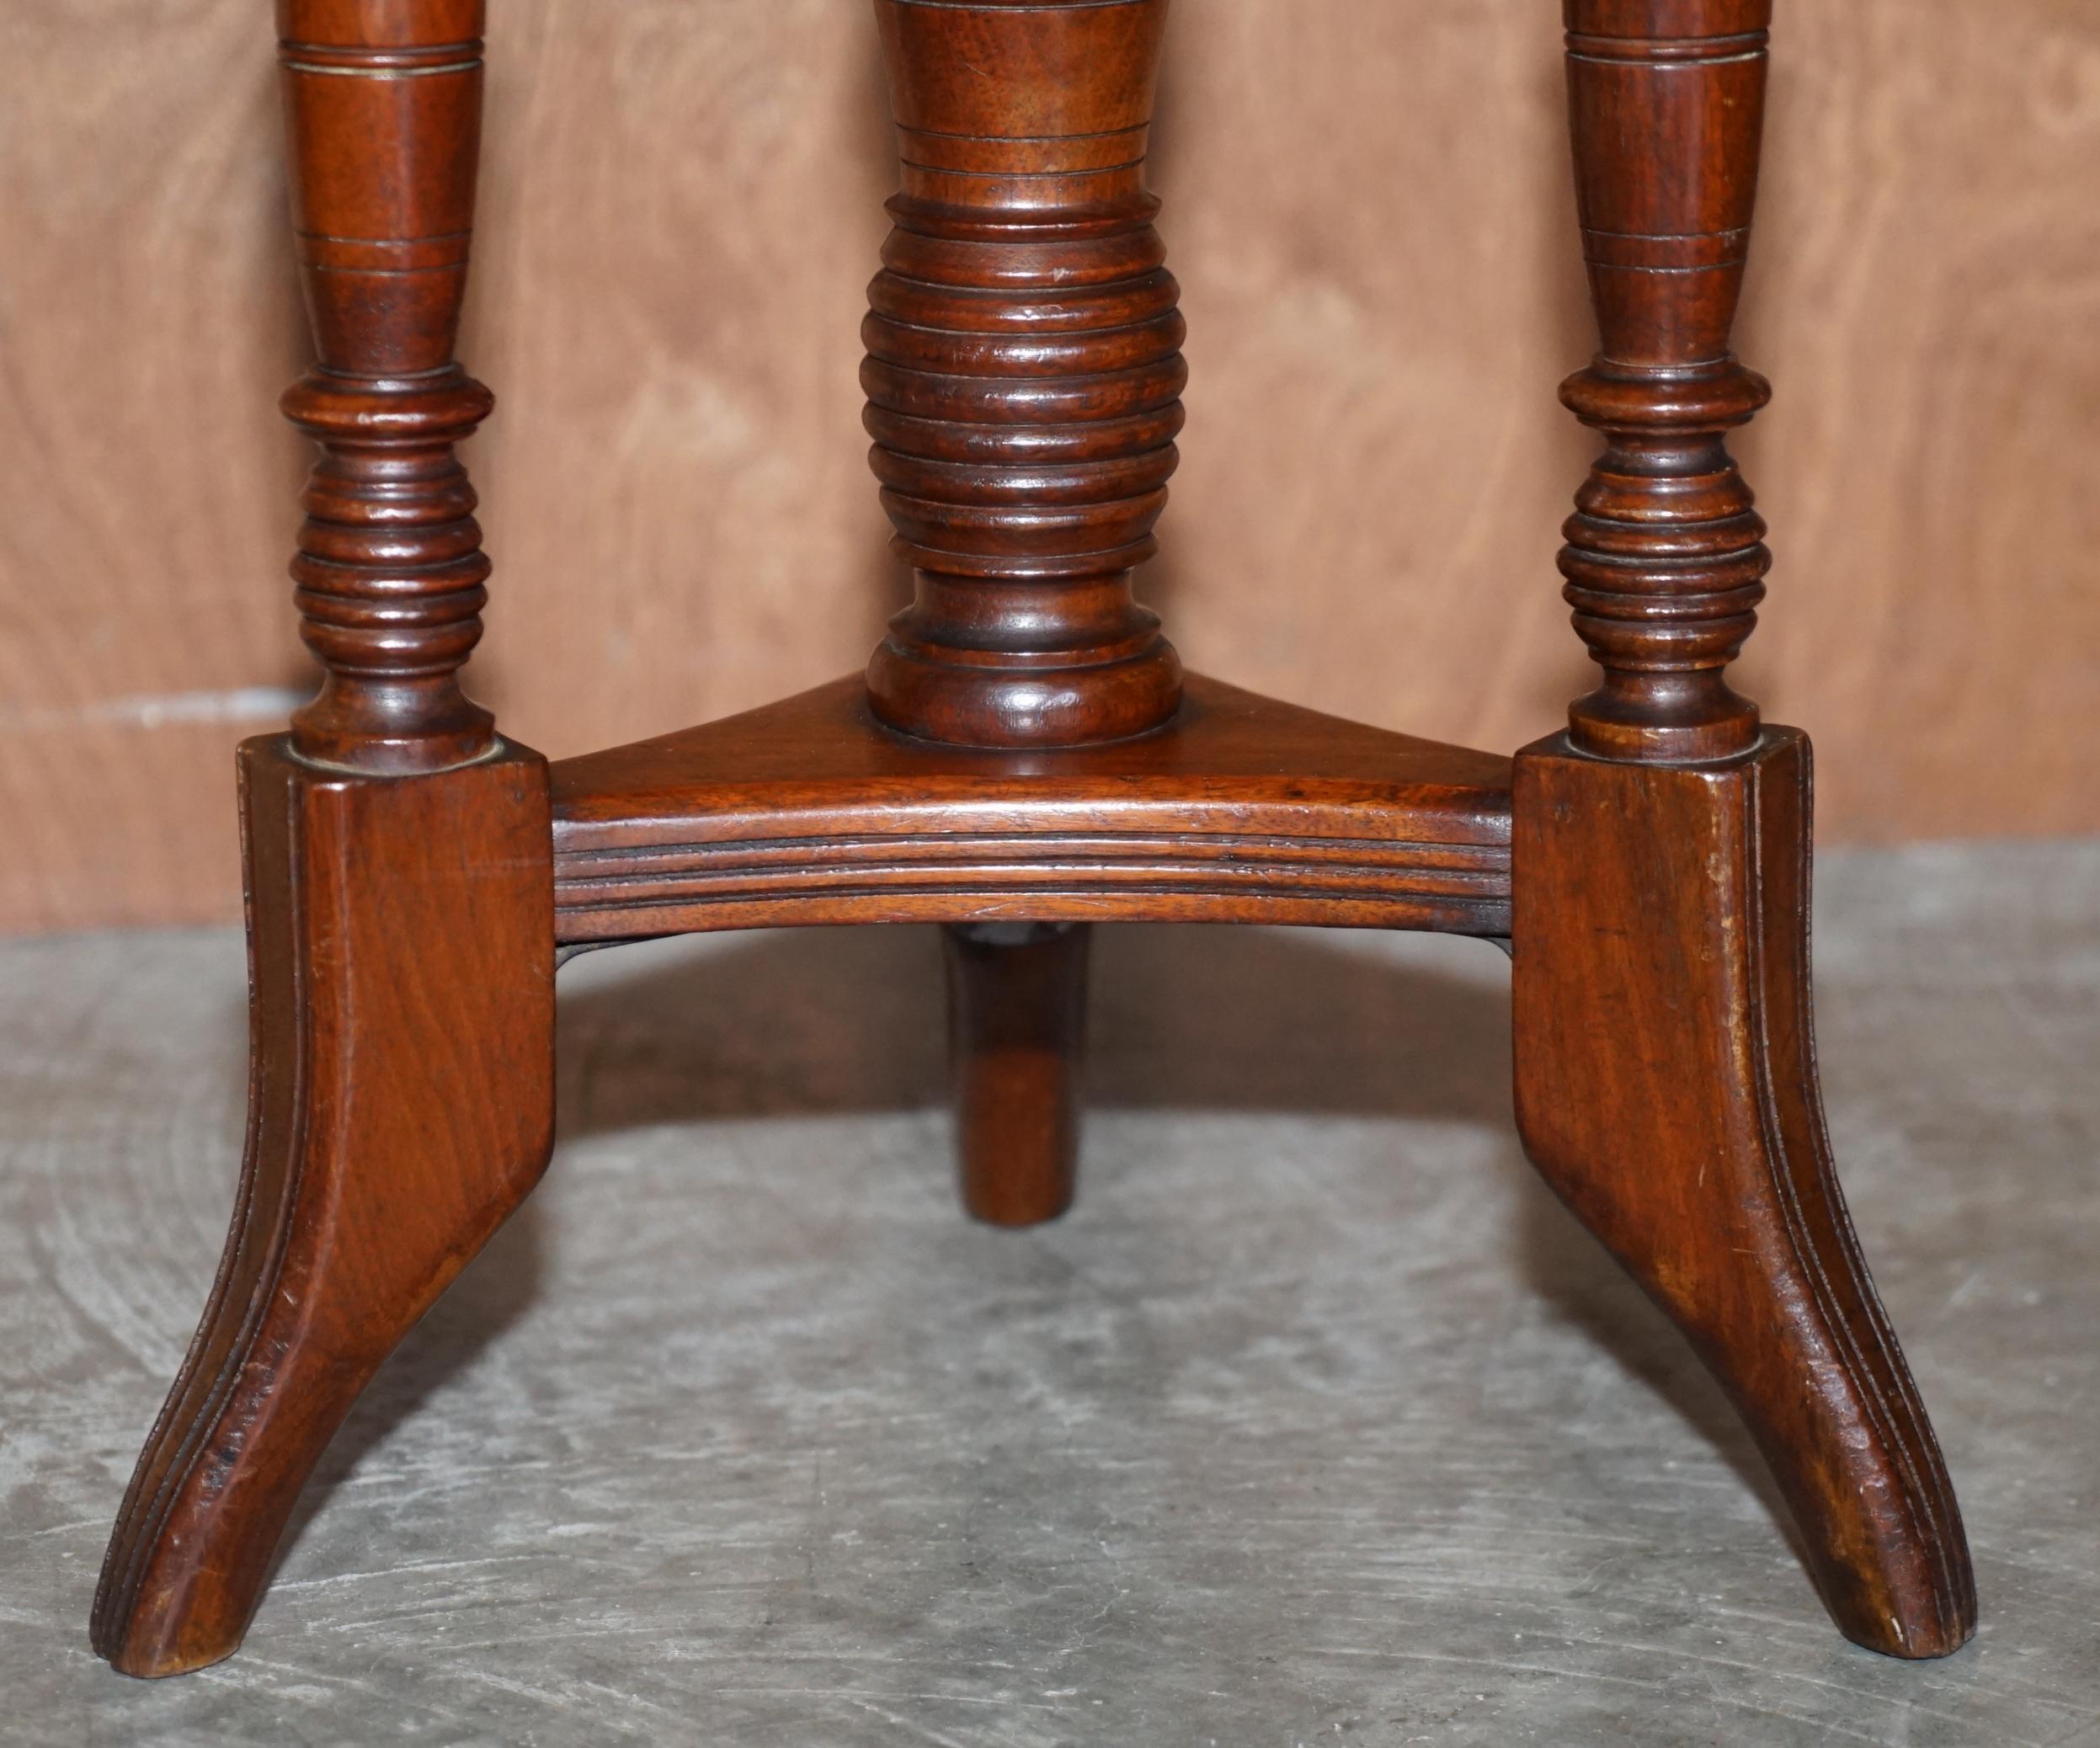 Late 19th Century Antique Victorian Hardwood Piano Stool with Decorative Base Height Adjustable For Sale